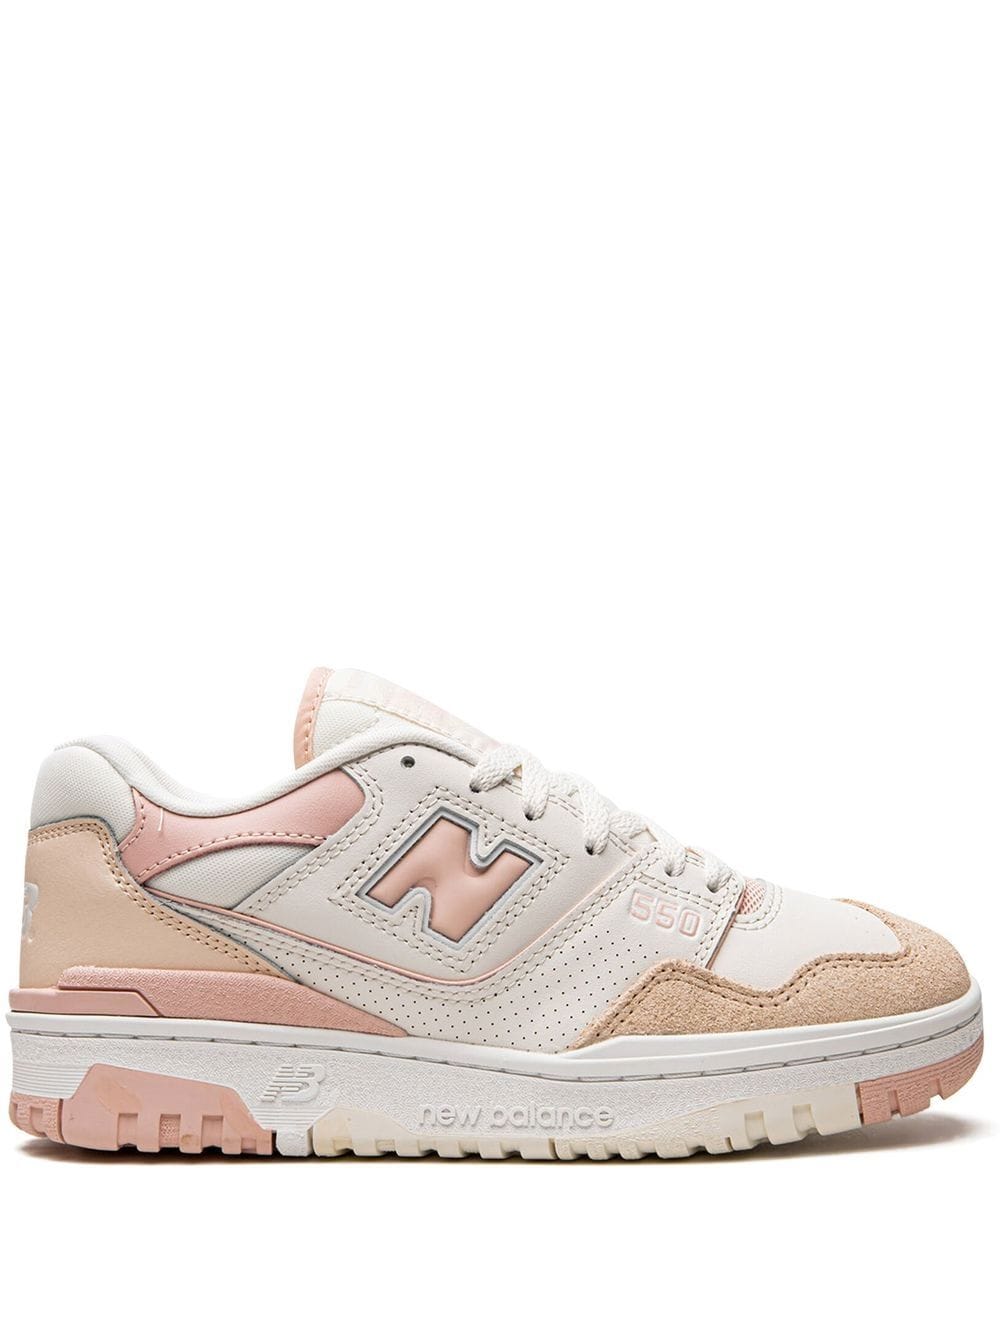 New Balance 550 "White Pink" sneakers